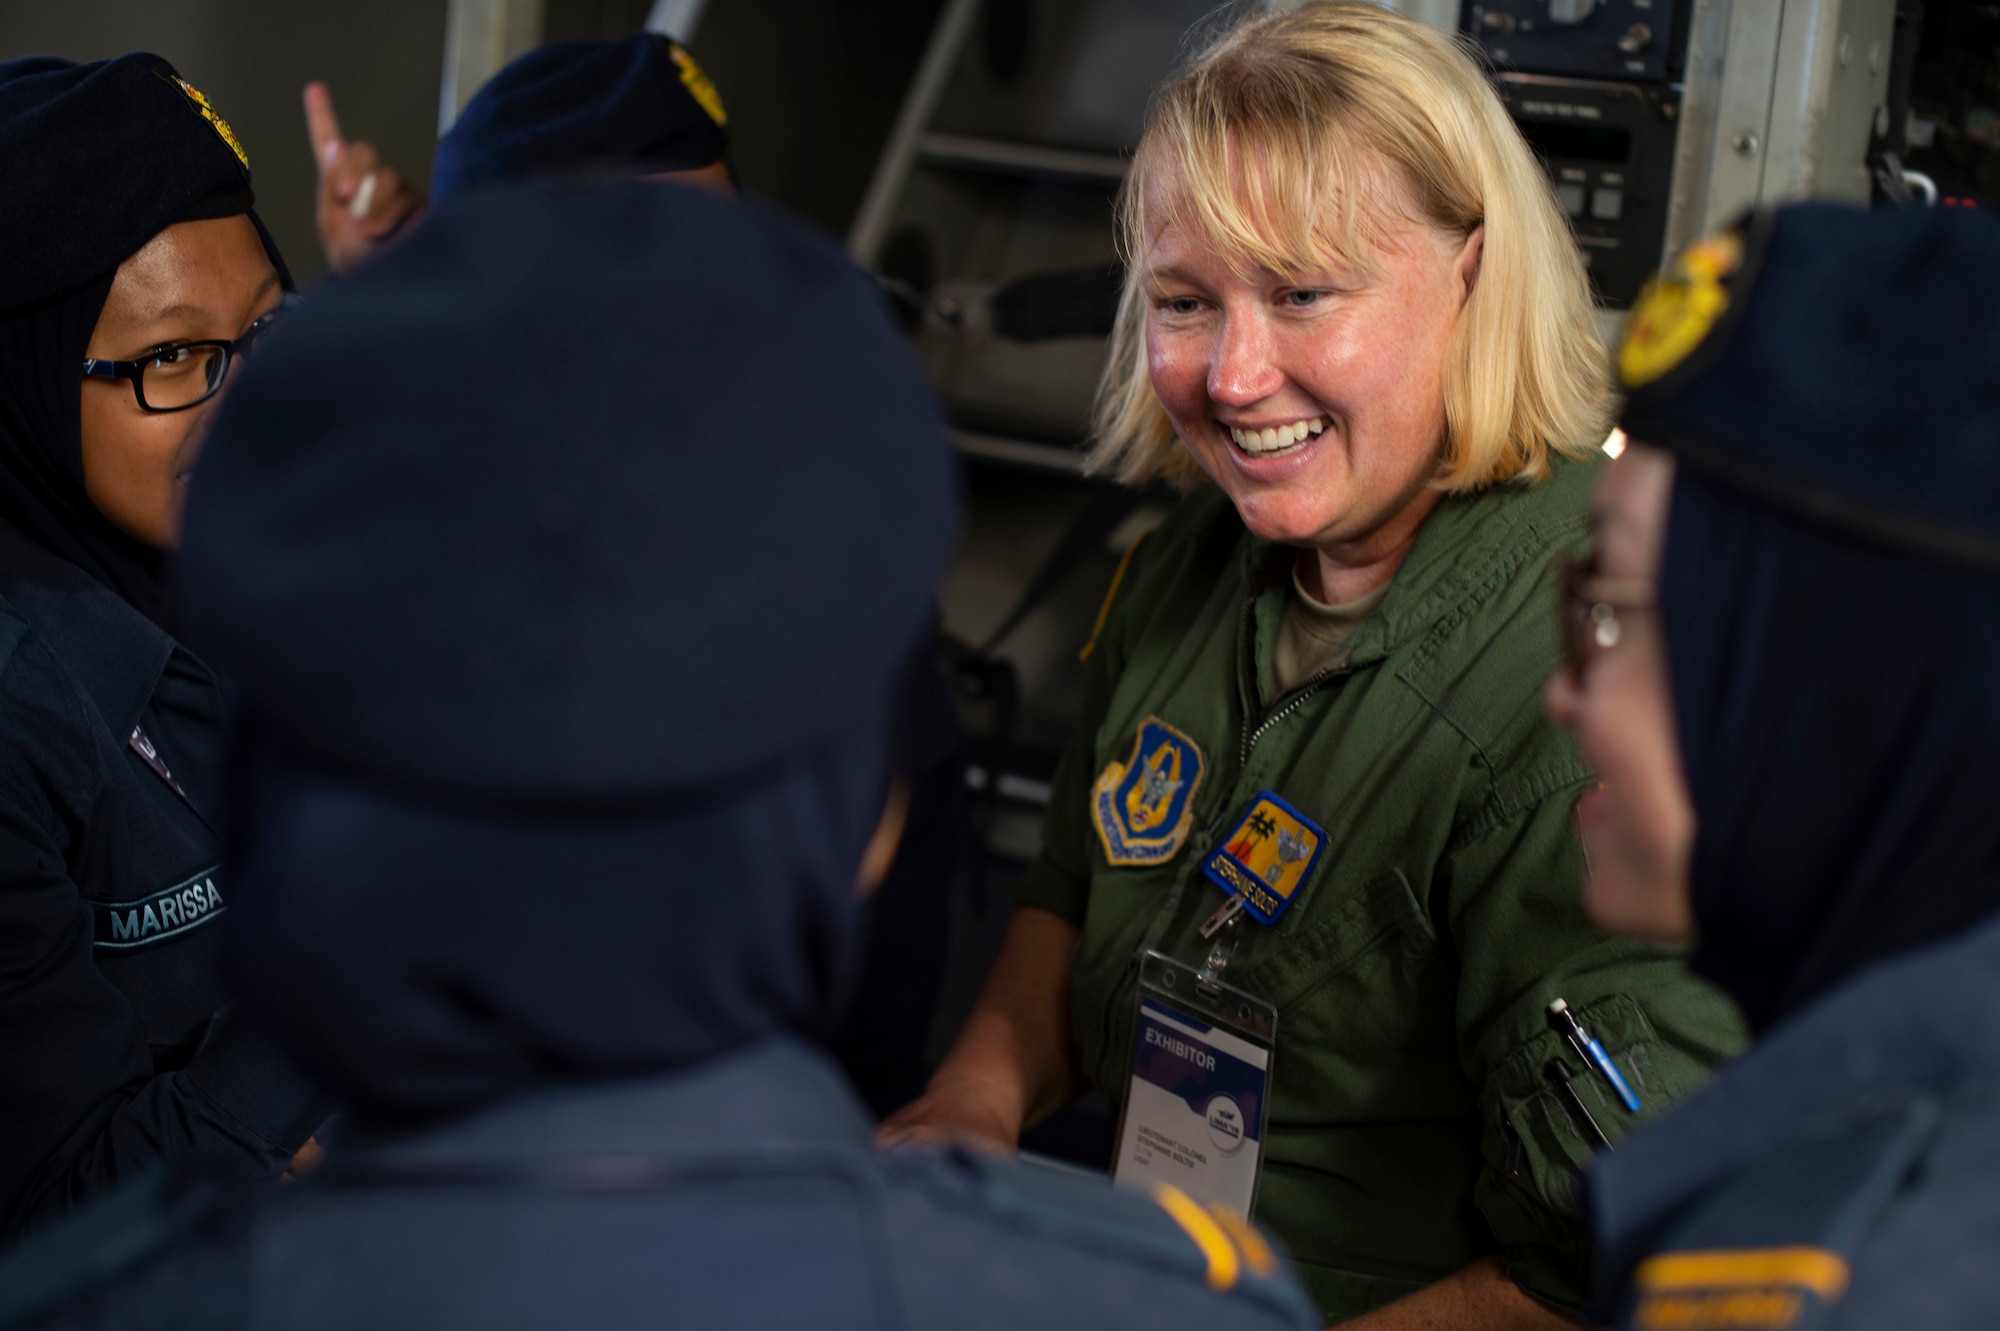 Lt. Col. Stephanie Soltis, 452nd Air Mobility Wing C-17 Globemaster III pilot from March Air Force Base, Calif., speaks to members of the Malaysian Defence Force during the Langkawi International Maritime and Aerospace Exhibition 2019 in Padang Mat Sirat, Malaysia, March 29, 2019.